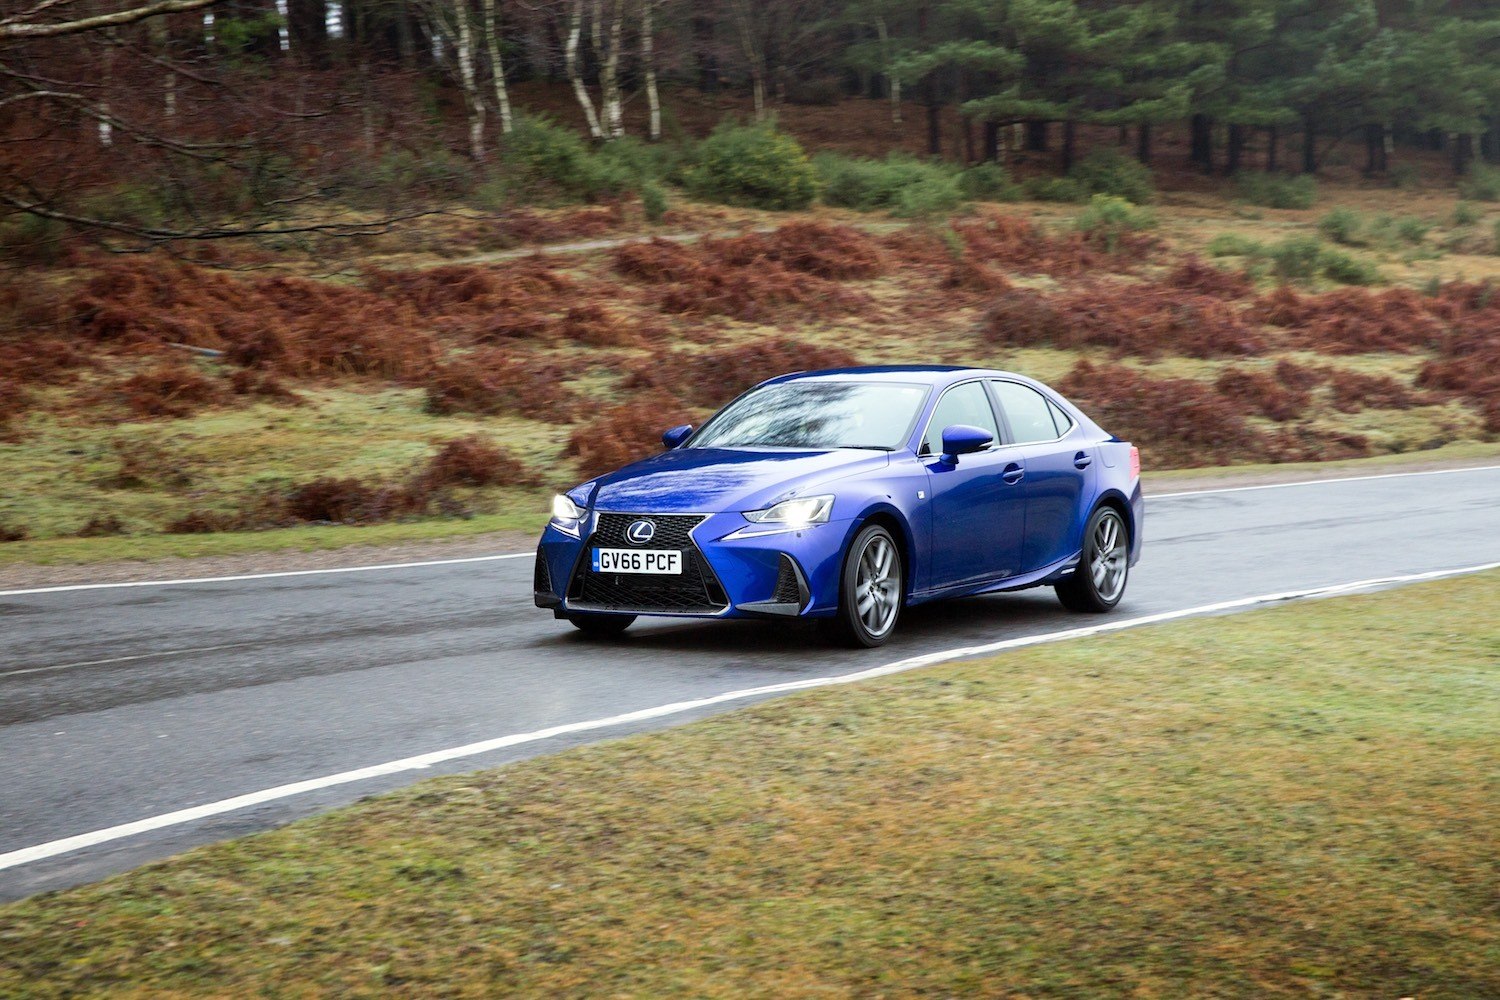 Neil Lyndon reviews the Lexus IS300h for Drive 5